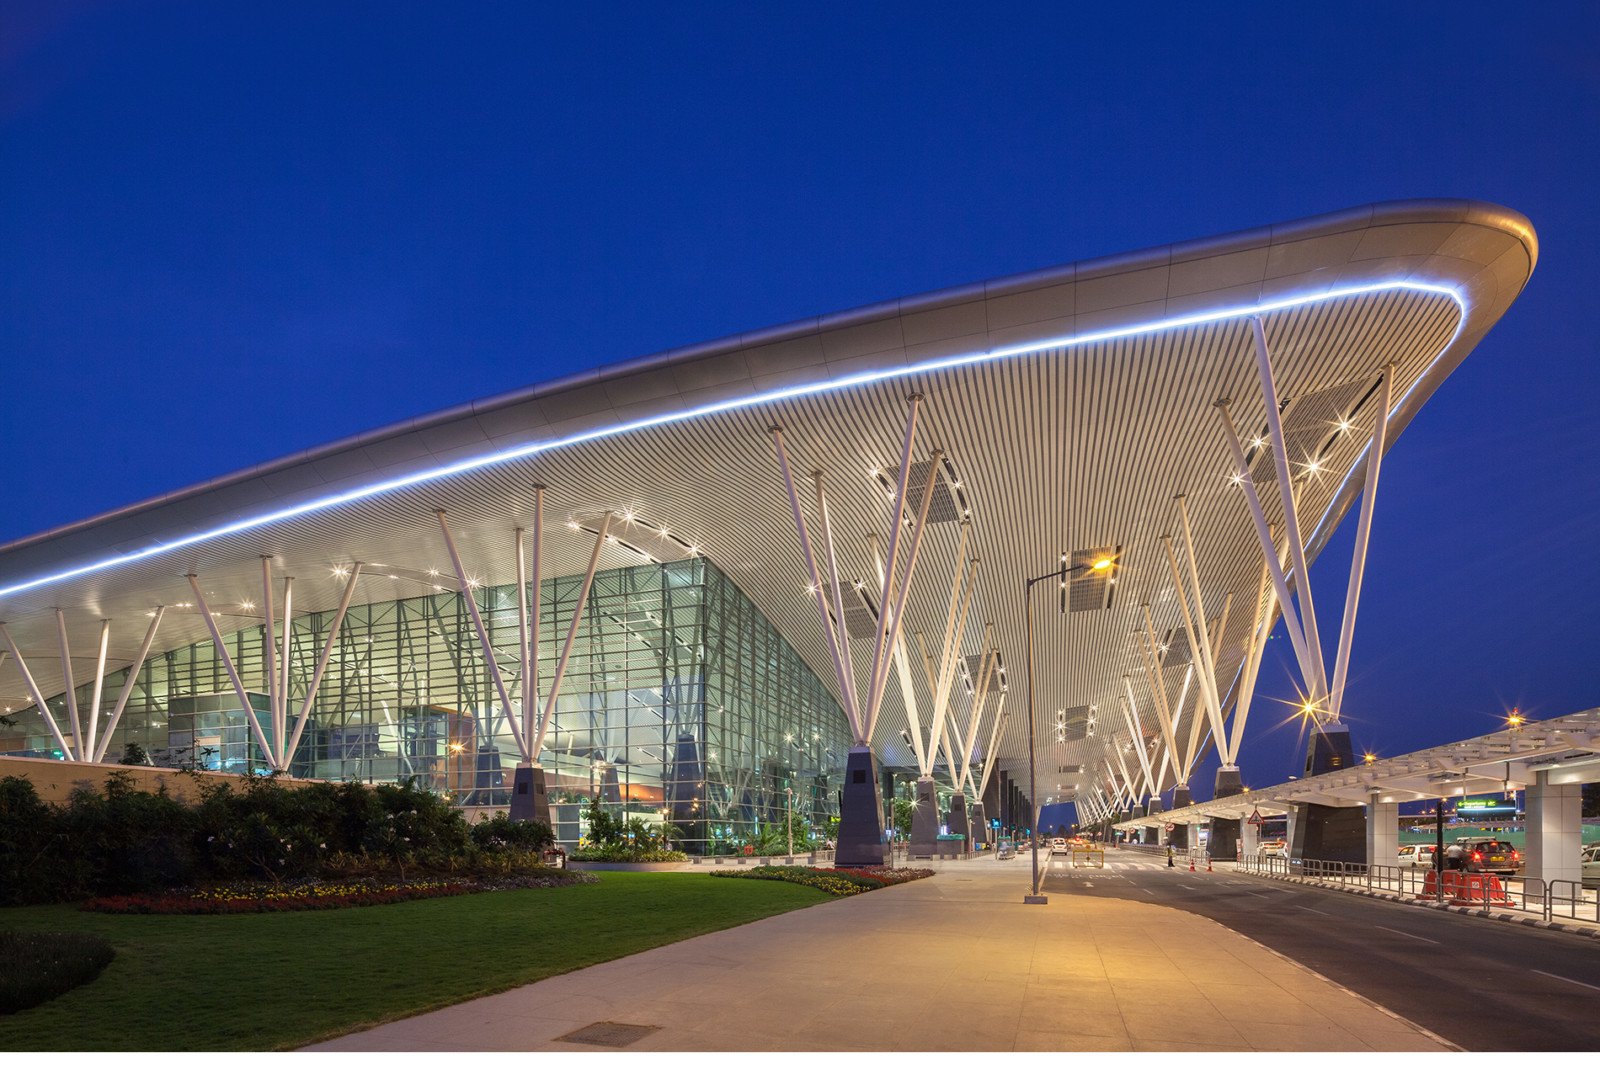 Largest Airport in India